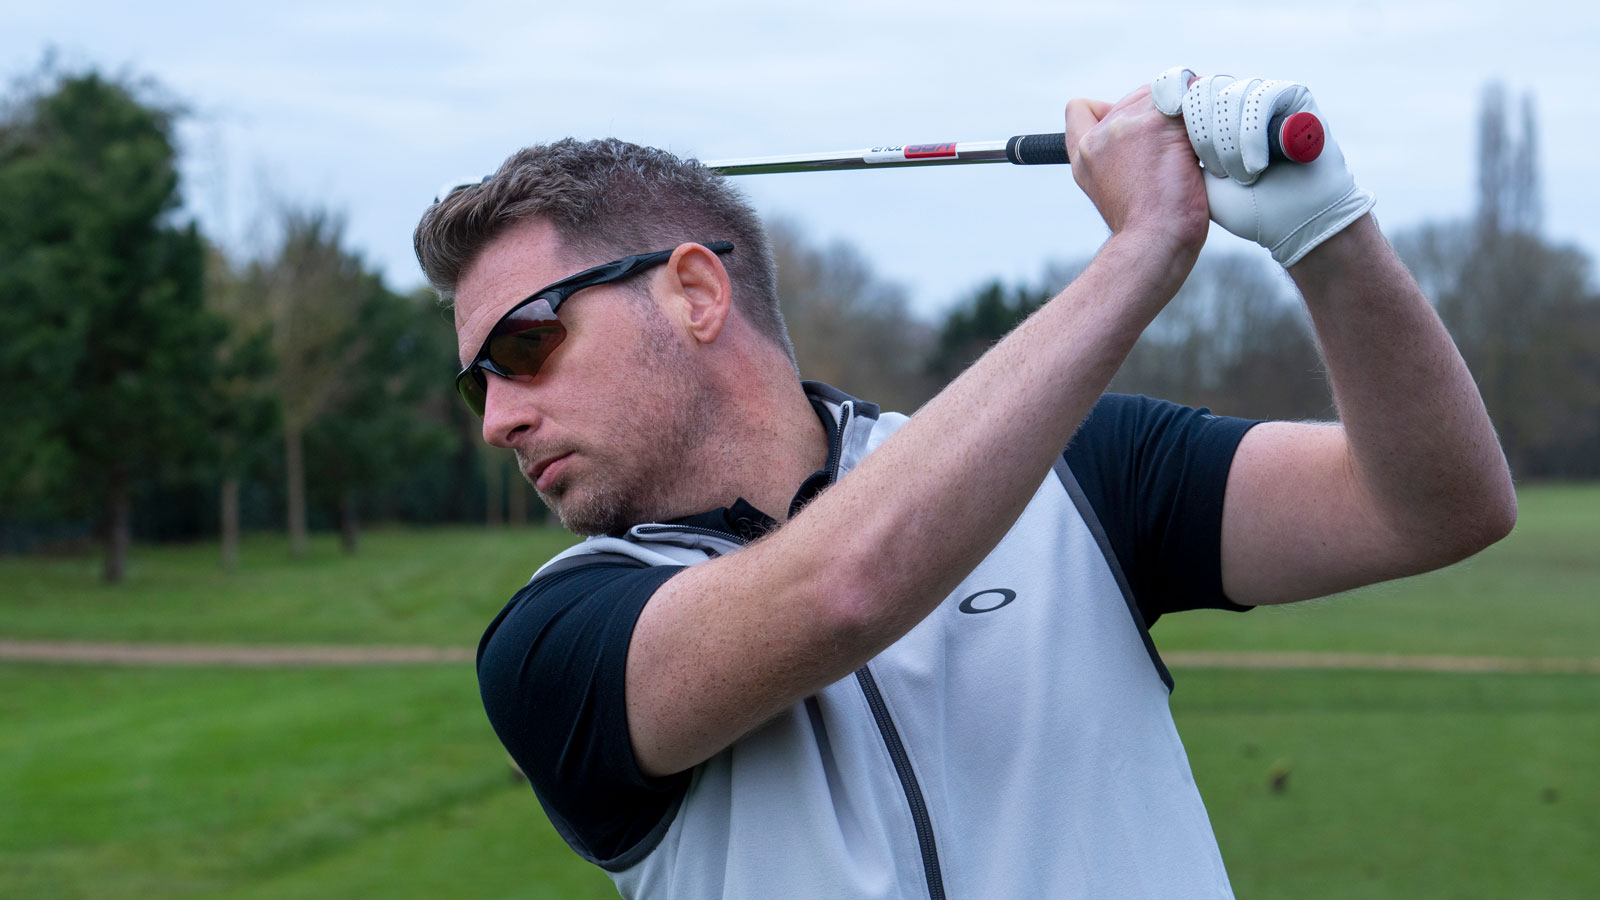 Oakley Half Jacket 2.0 XL Sunglasses Review | Golf Monthly